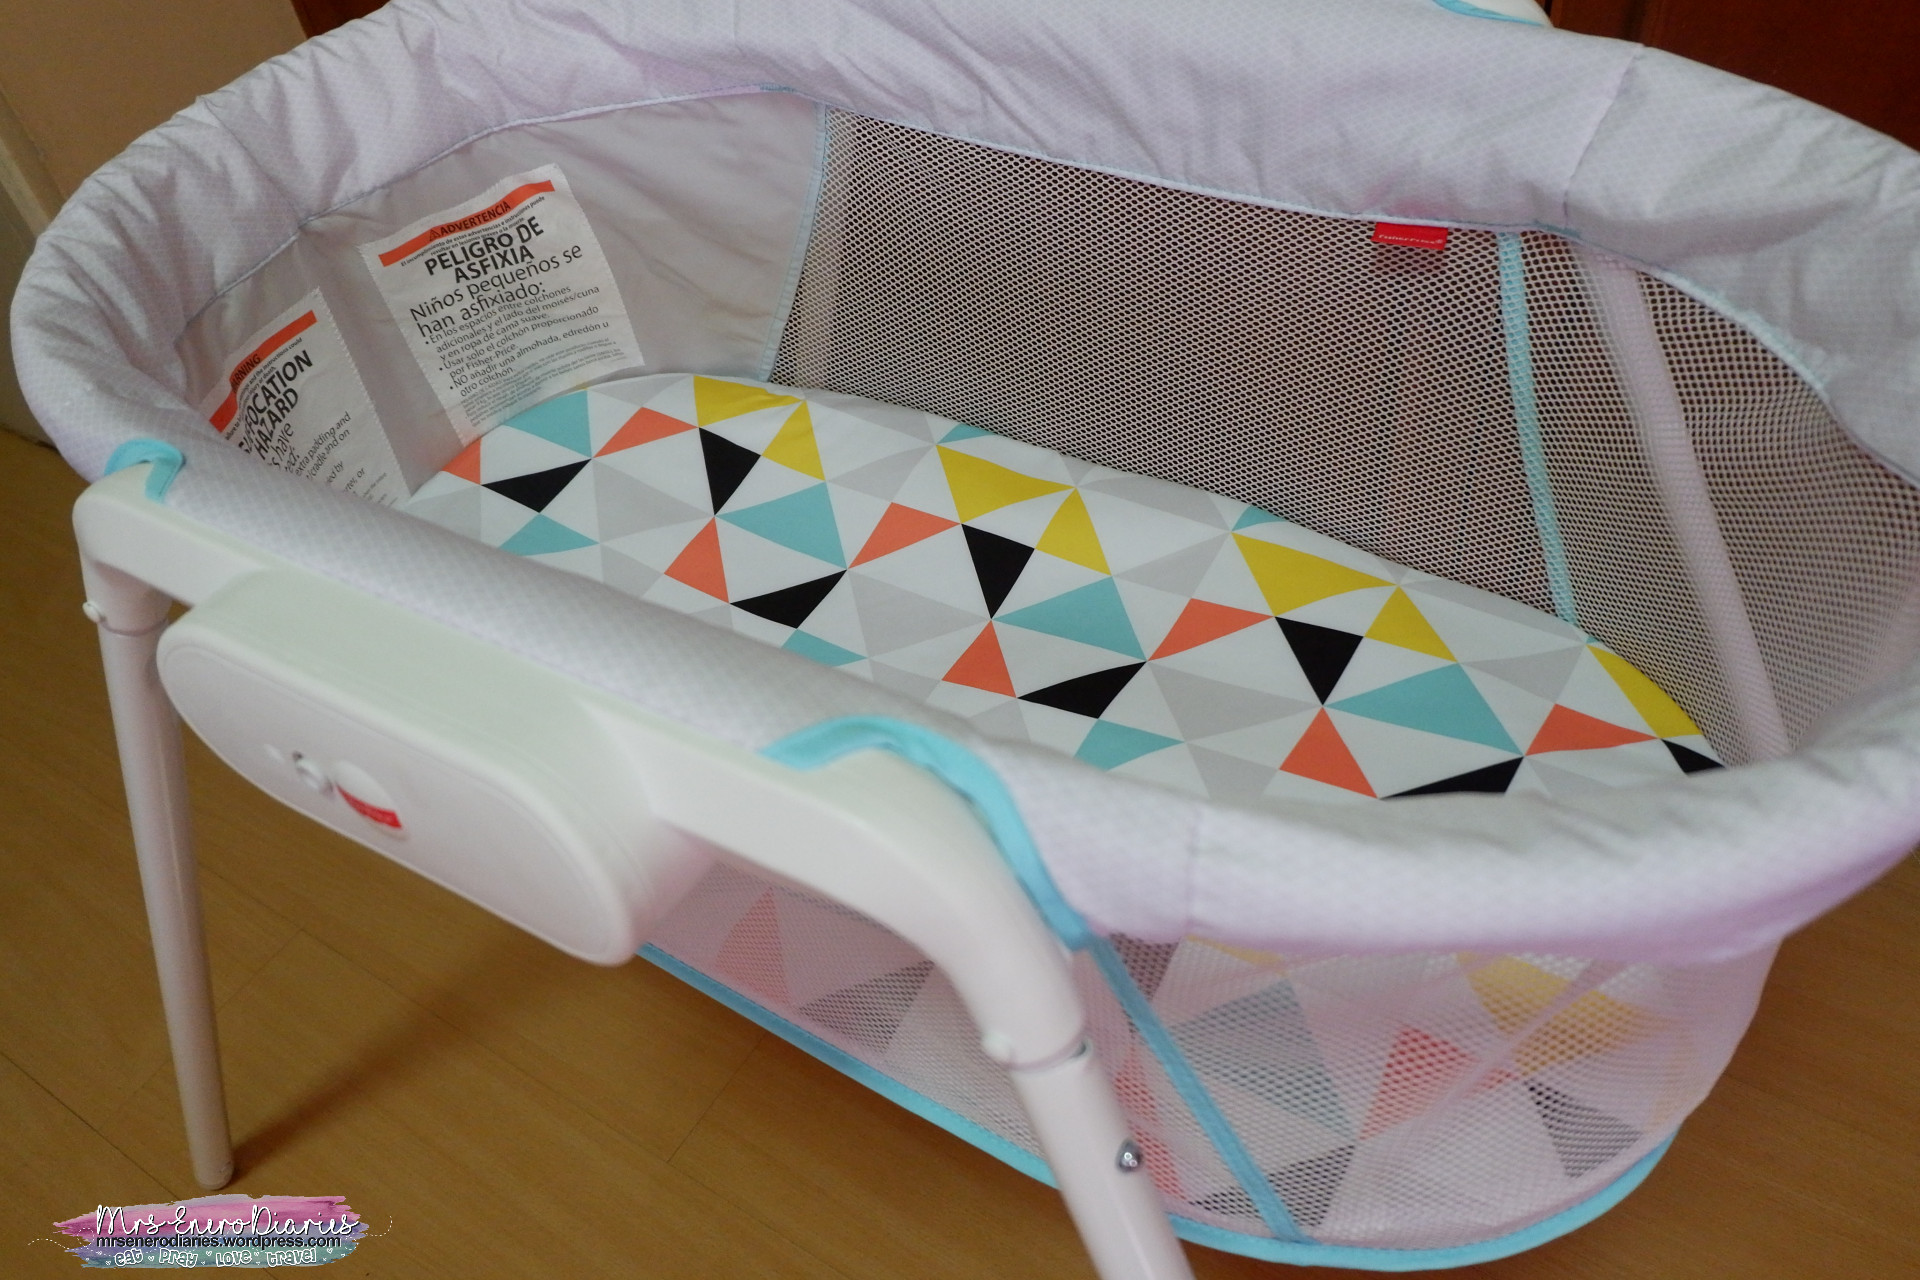 fisher price stow and go bassinet review